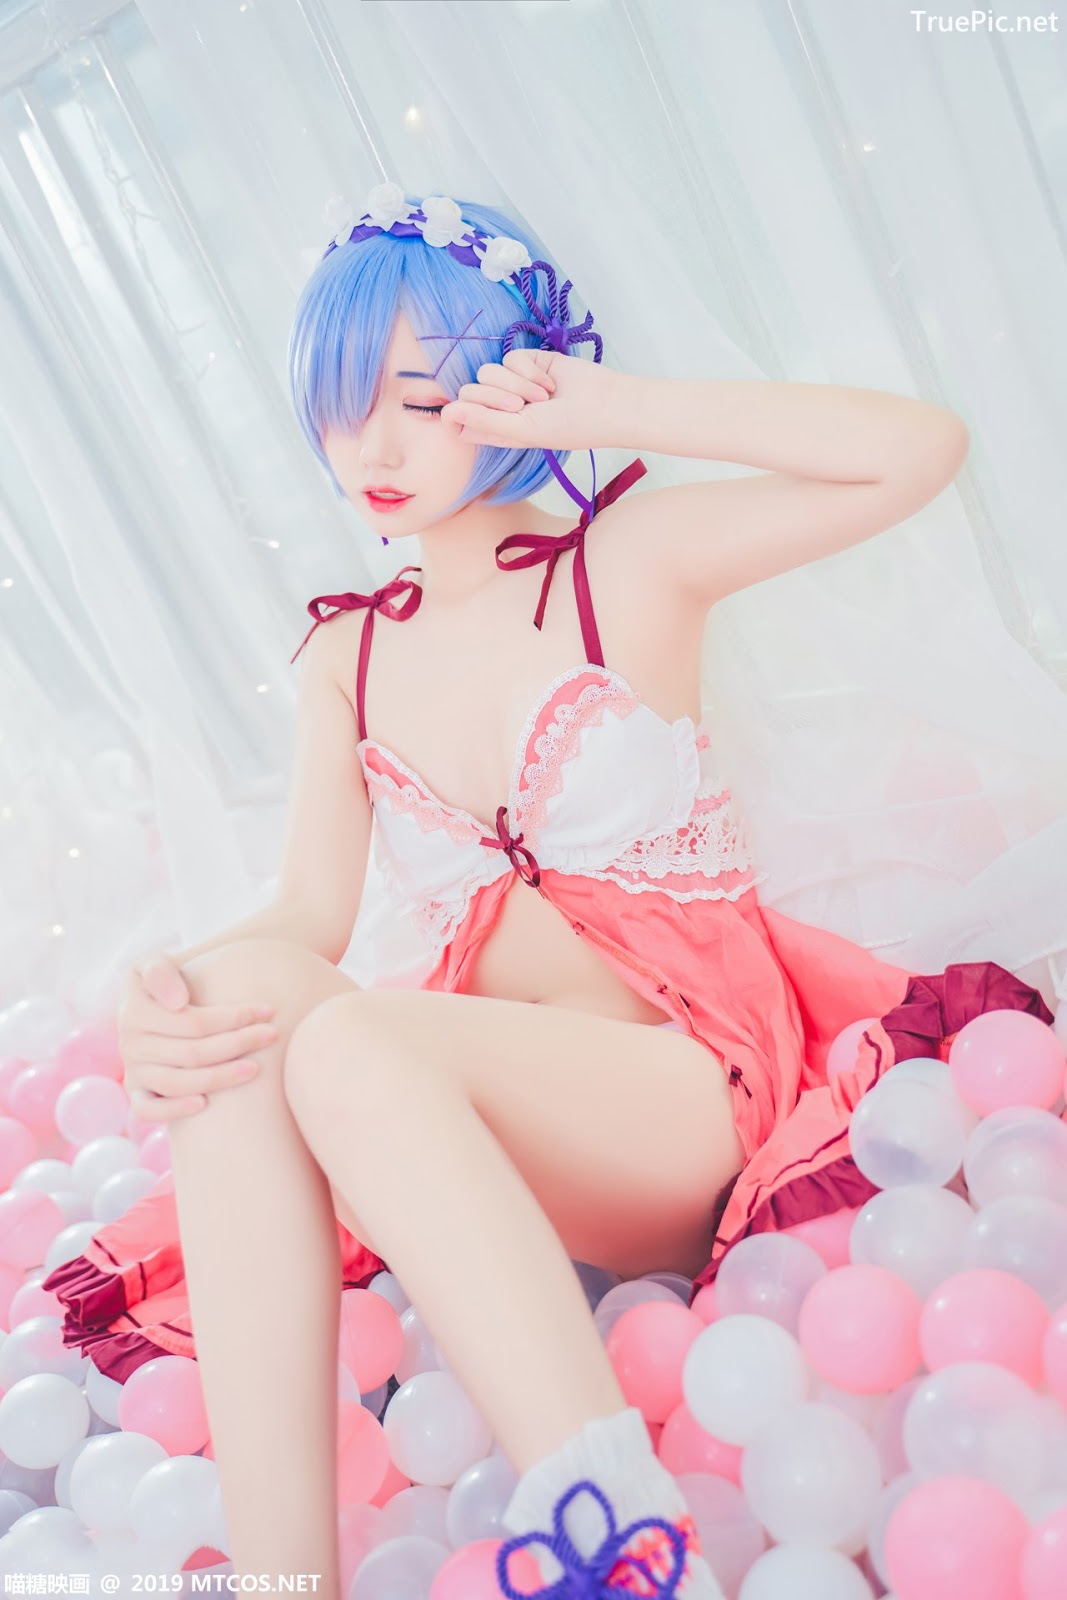 Image [MTCos] 喵糖映画 Vol.018 – Chinese Cute Model – Beautiful Rem Cosplay - TruePic.net - Picture-30